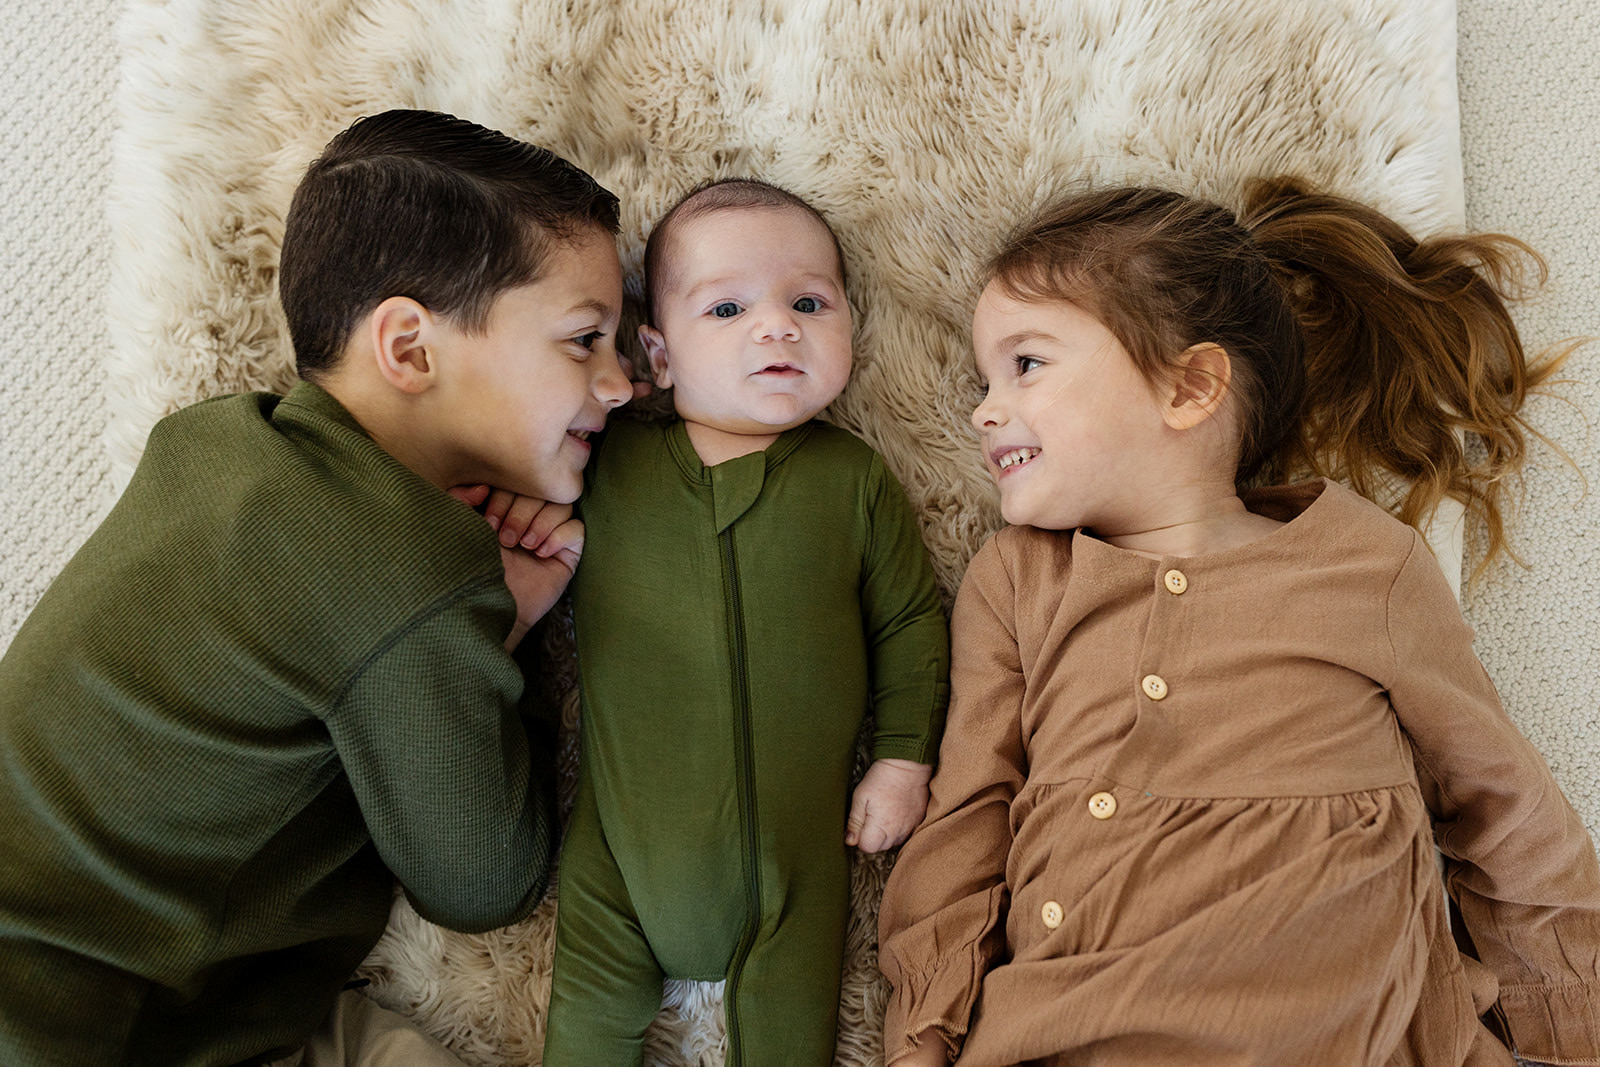 A brother and a sister look at their newborn brother during their family photo session